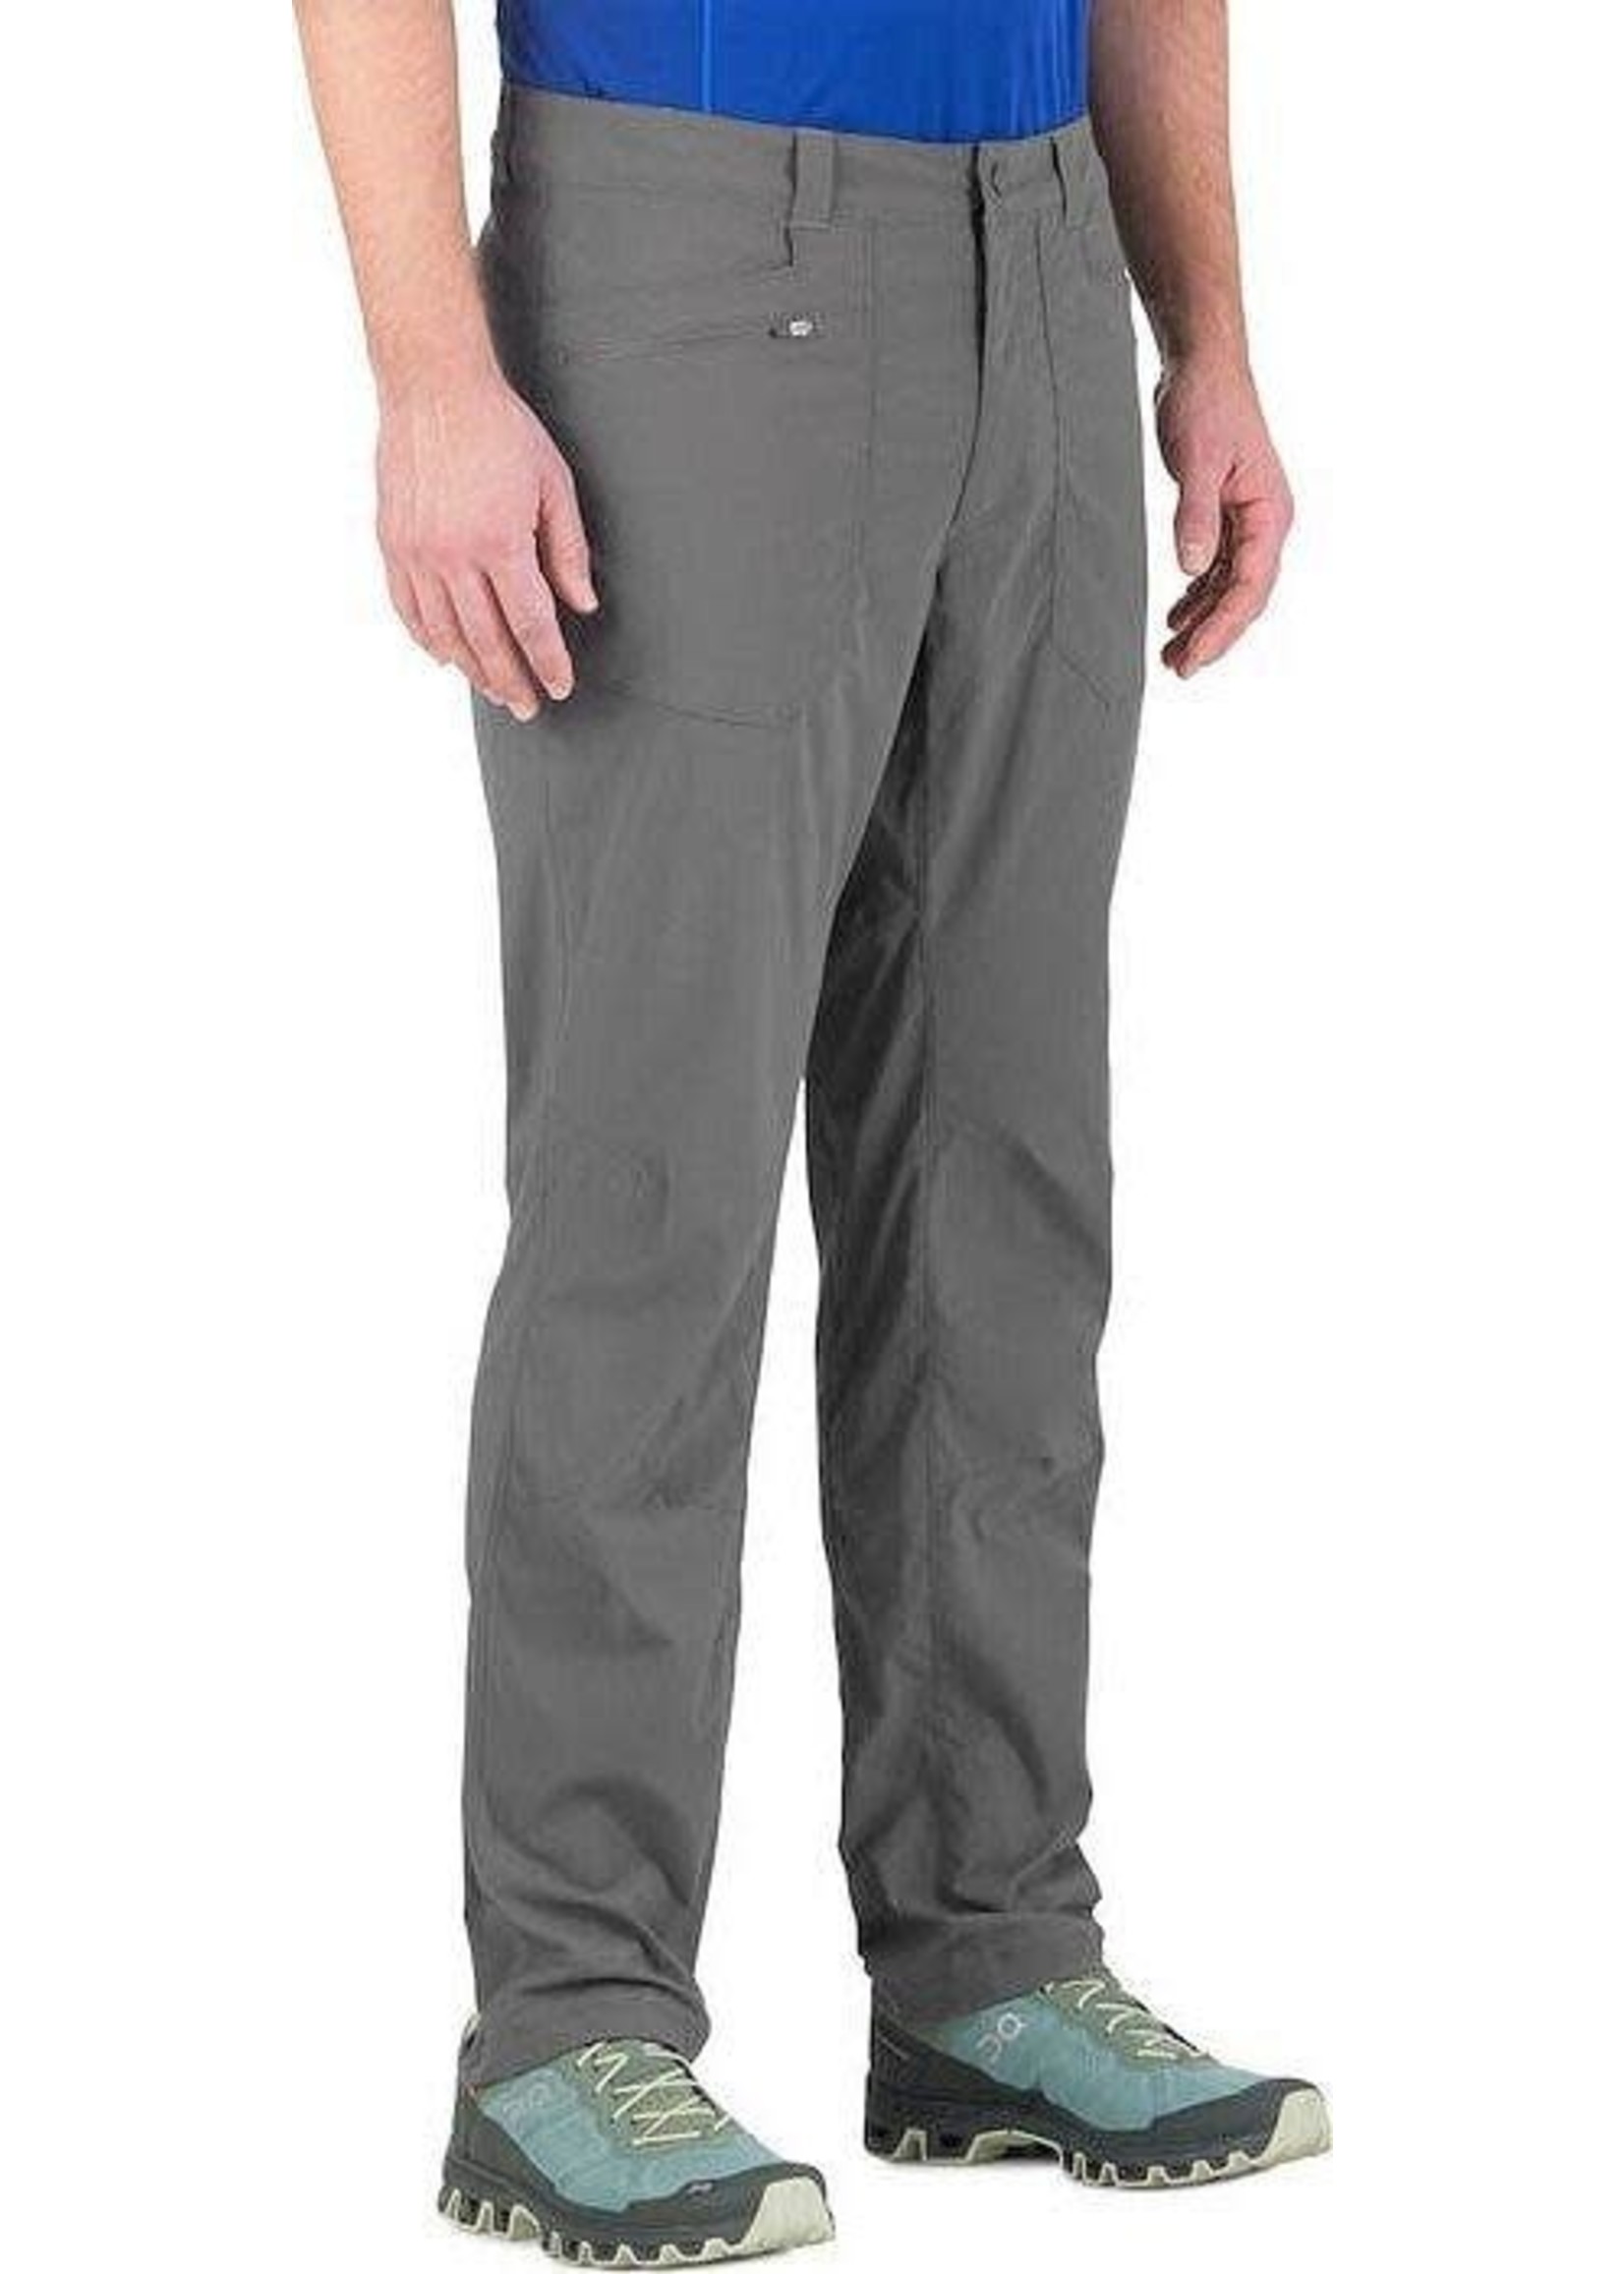 Outdoor Research Pantalons Equinox Convertible pour hommes